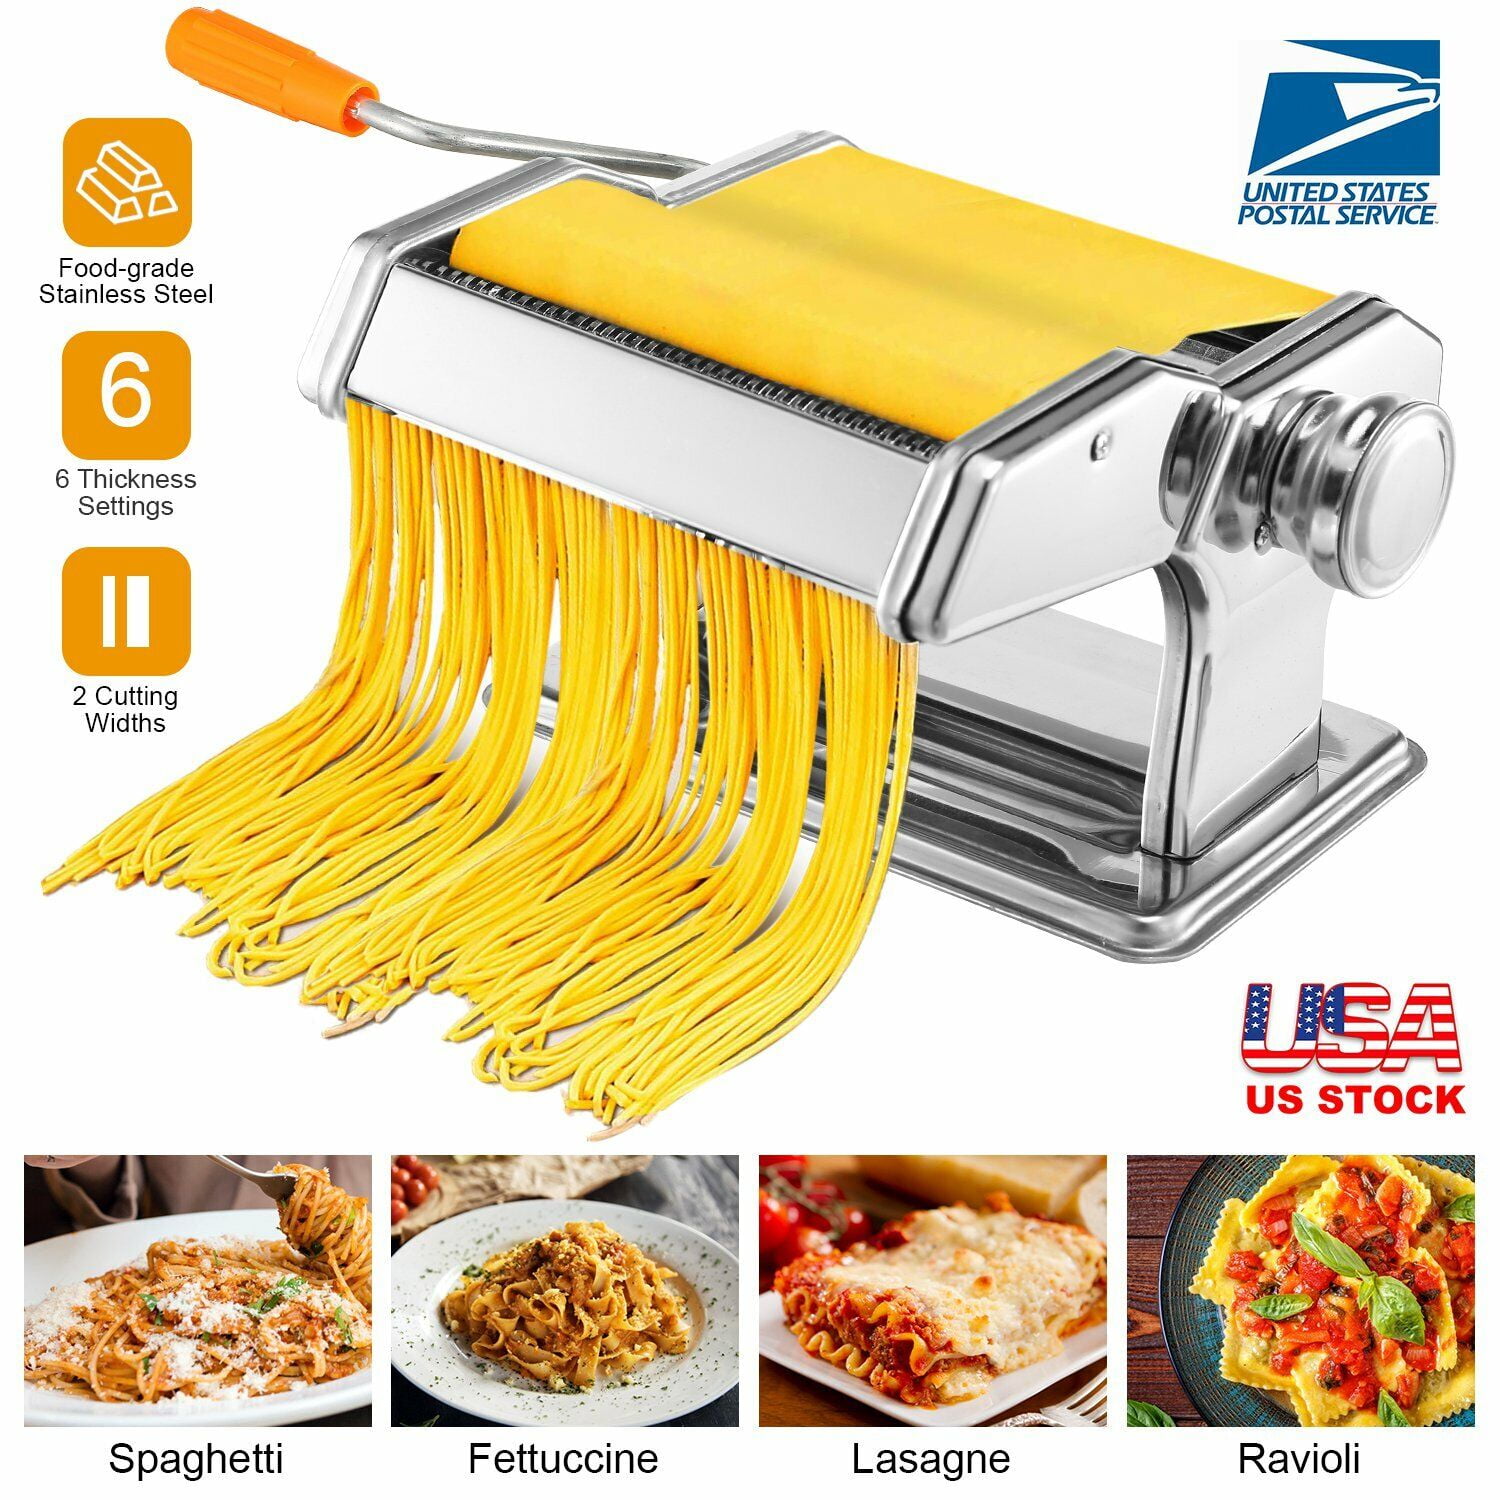 This Pasta Maker Is My Newest Obsession (+ More Cool Refurbished